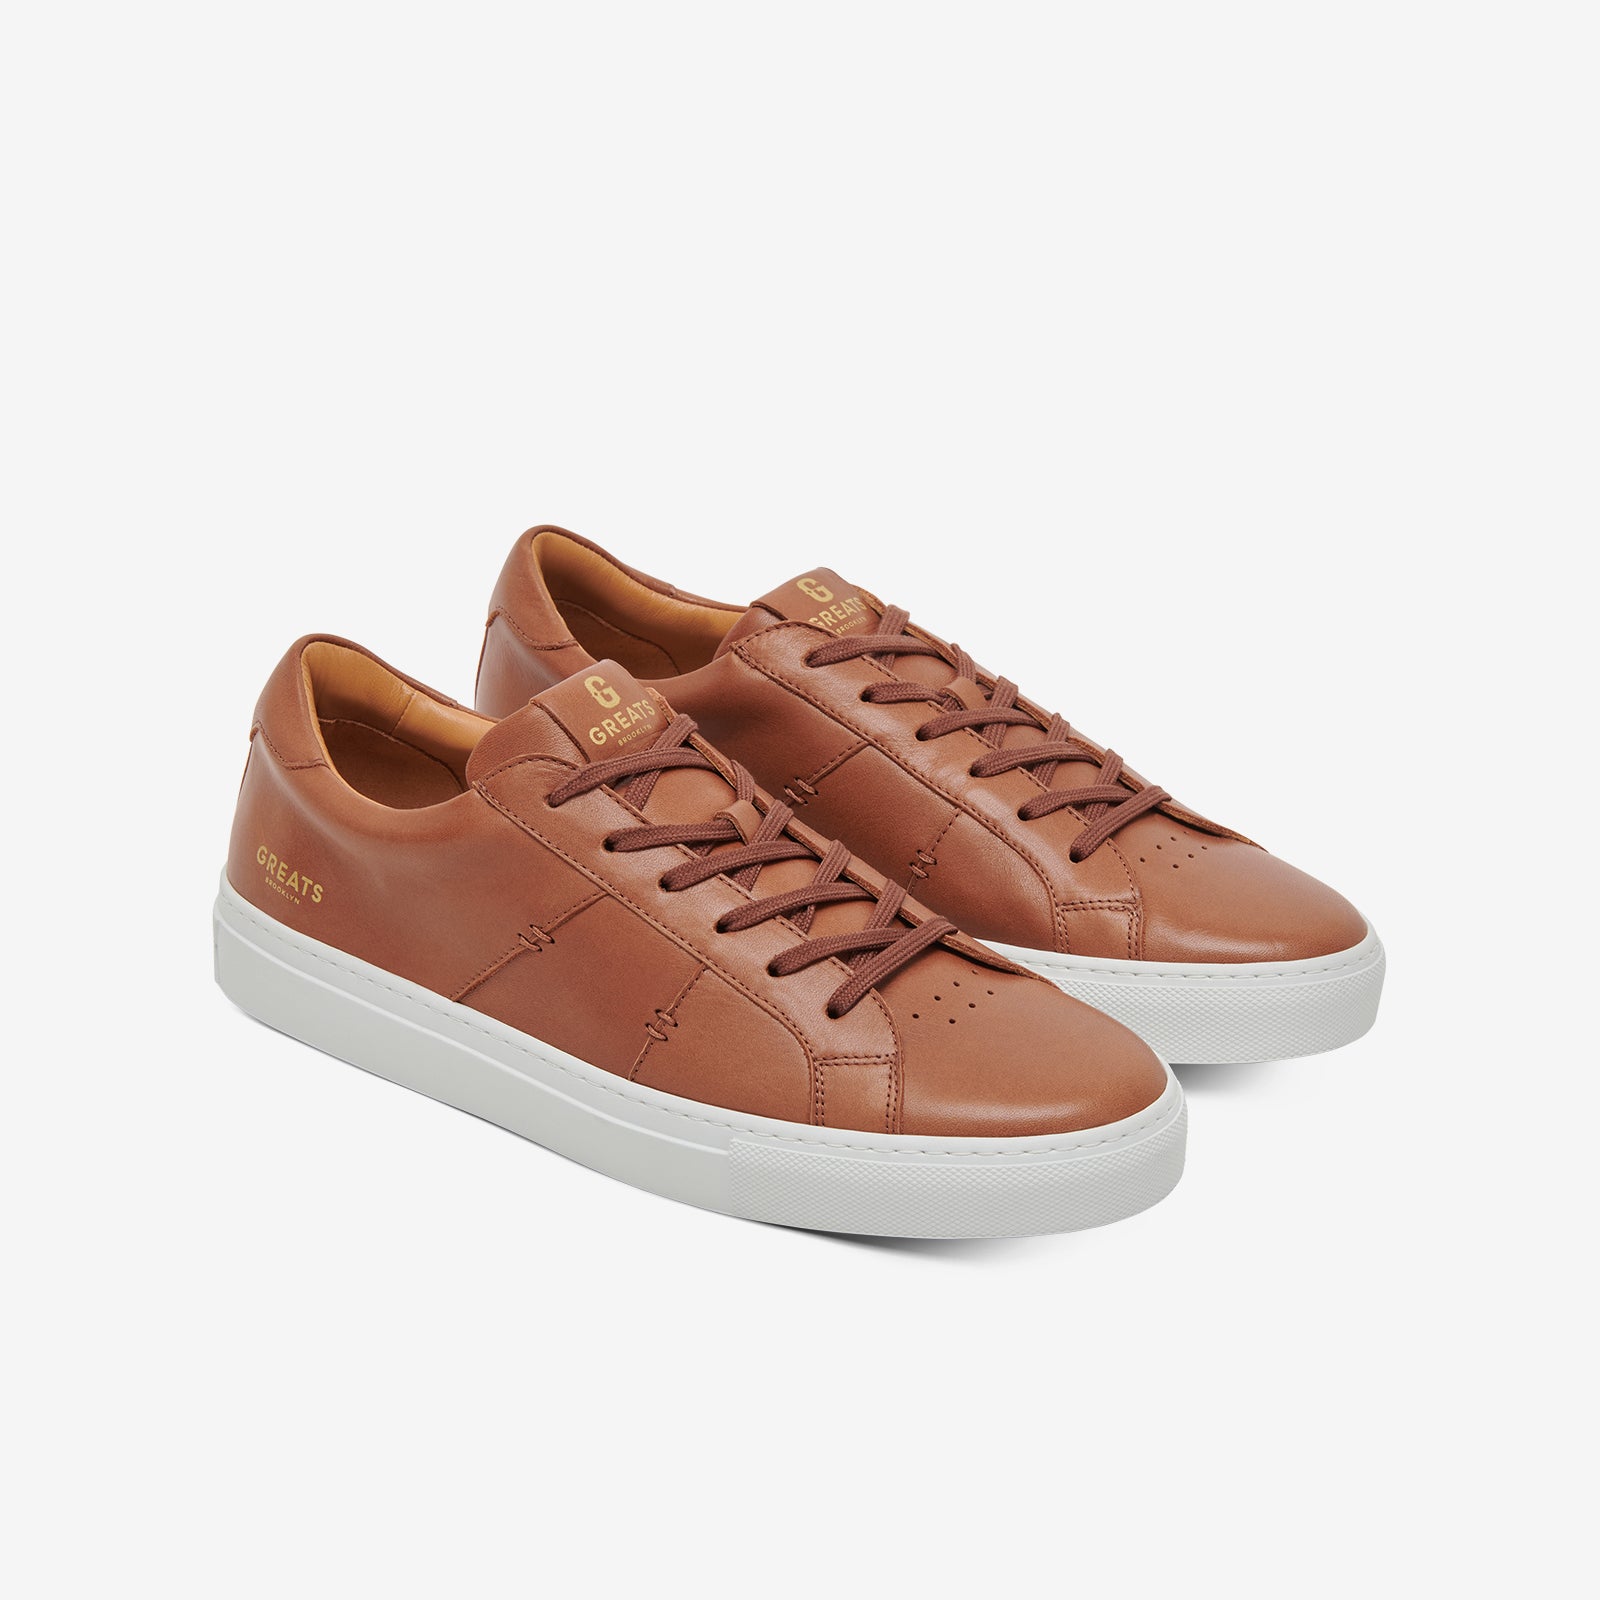 Greats - The Royale 2.0 - Cuoio - Men's Shoe – GREATS